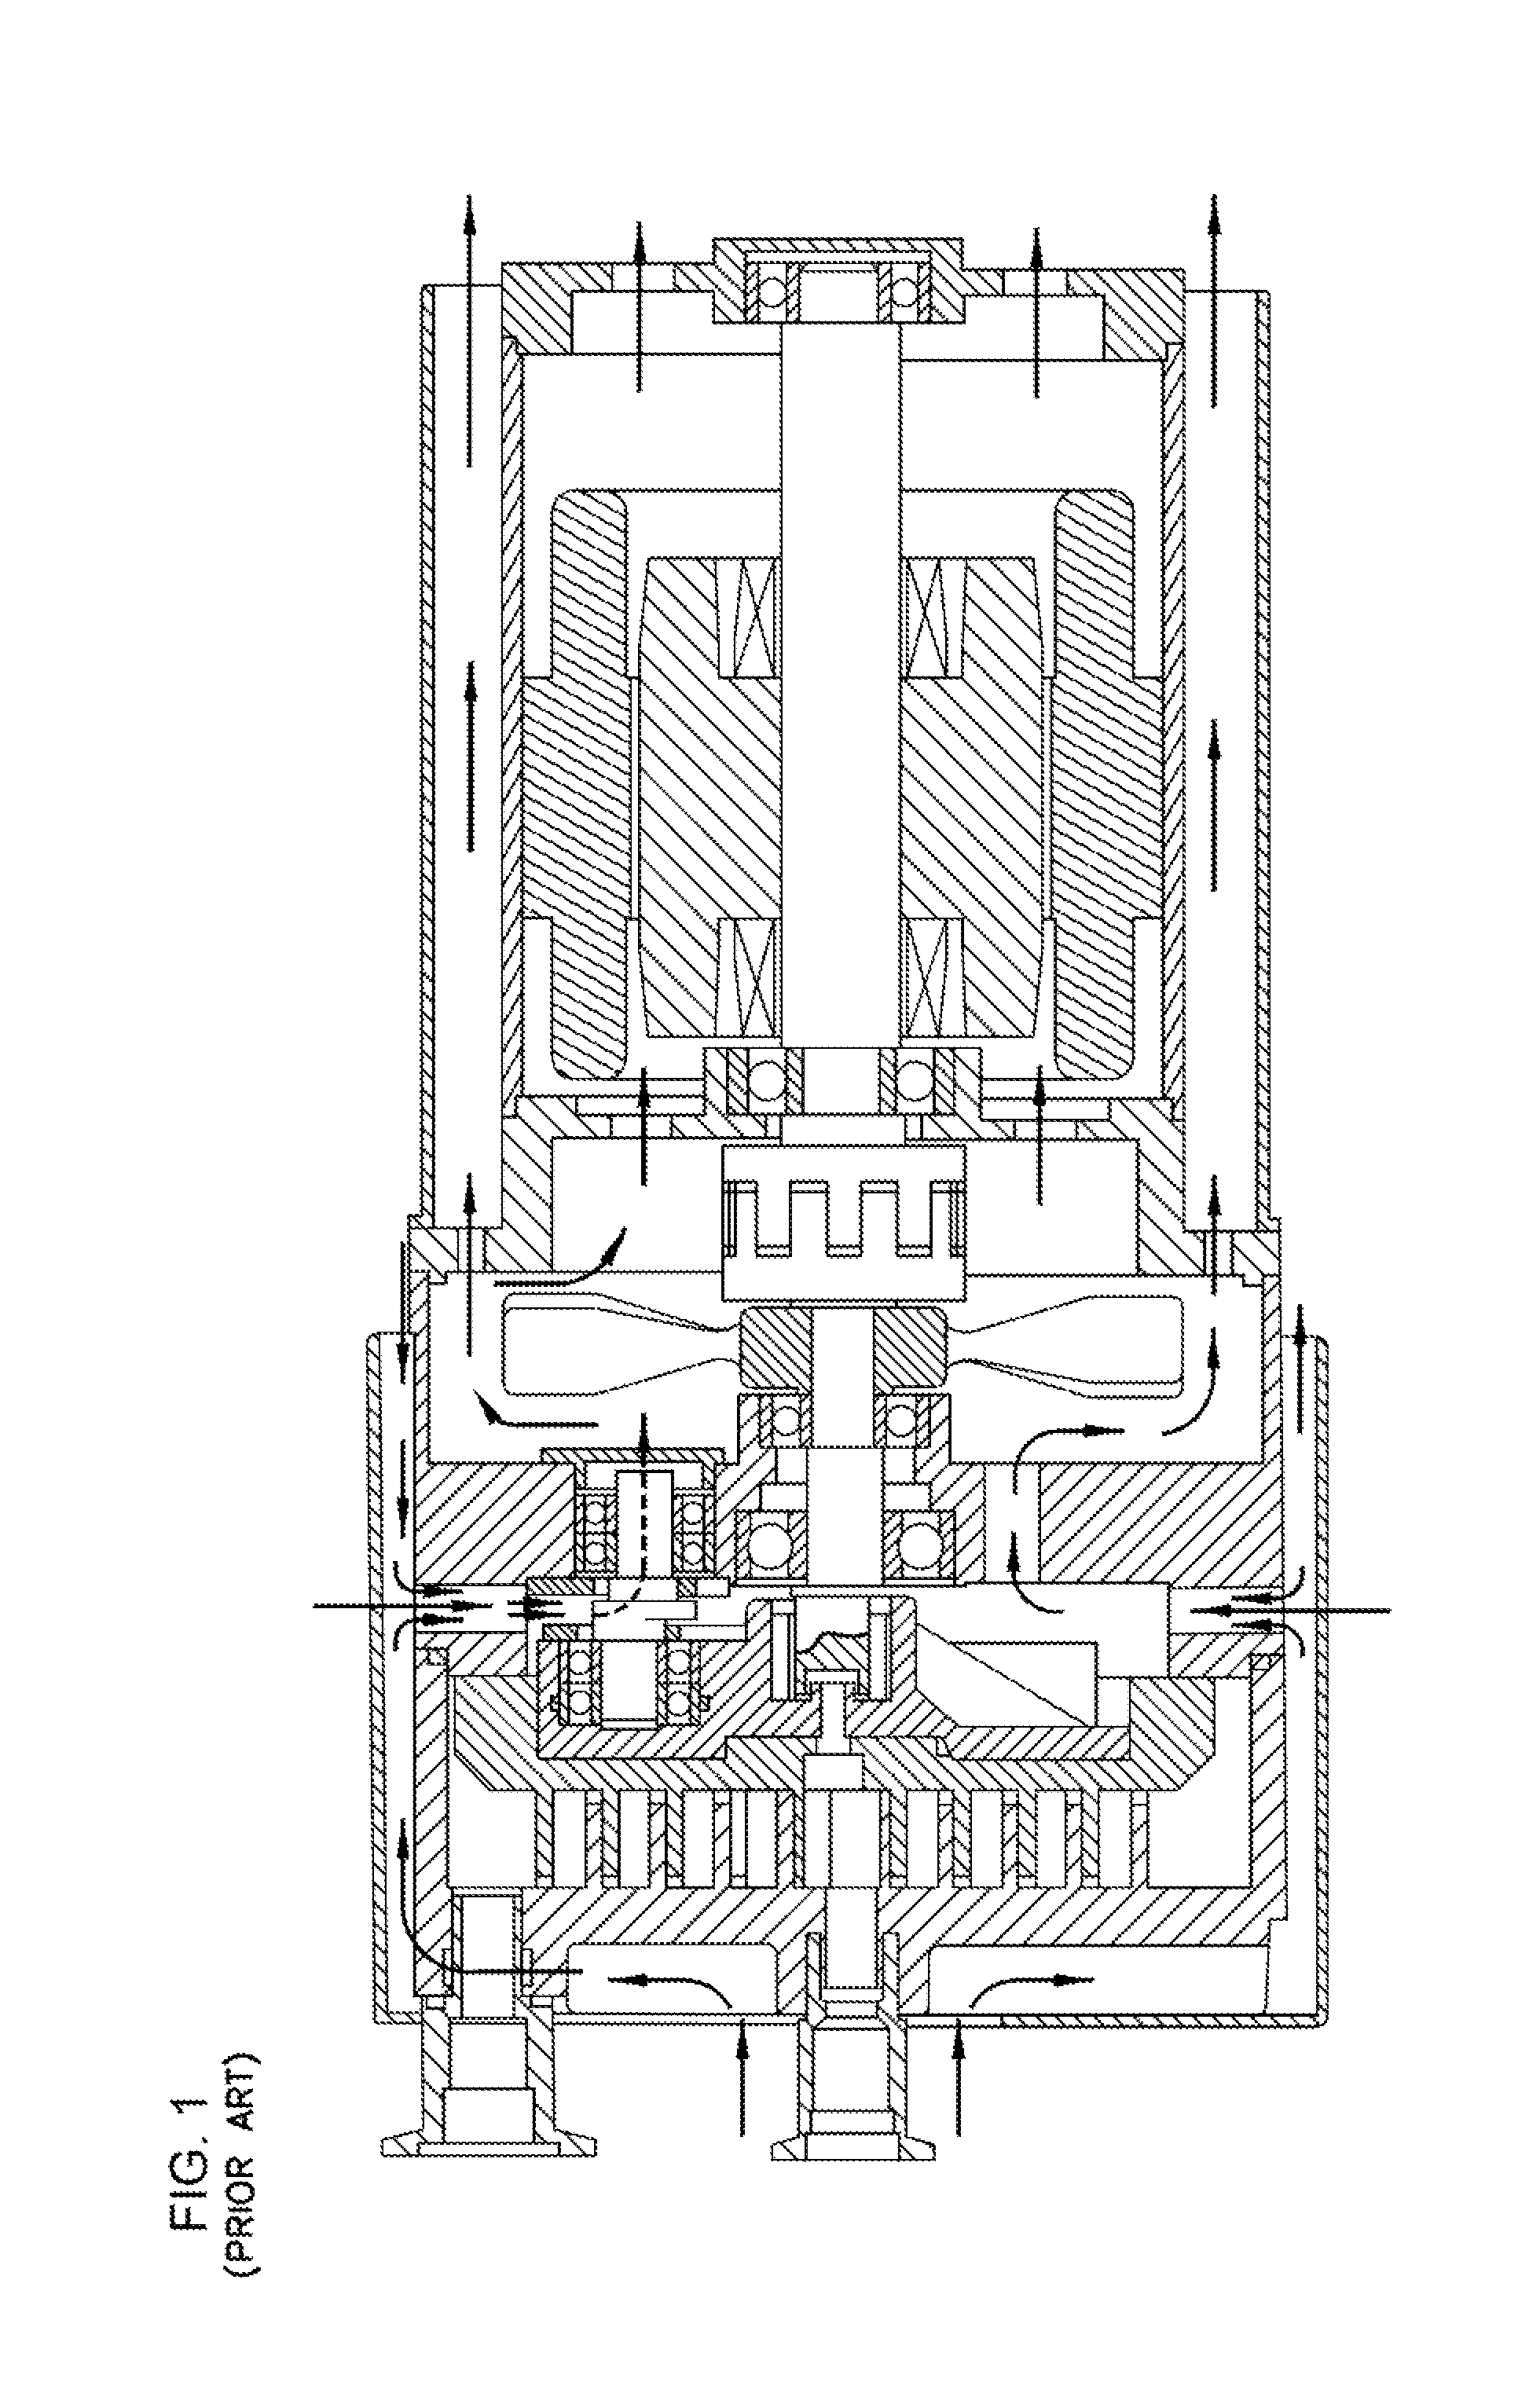 Scroll-type fluid displacement apparatus with improved cooling system